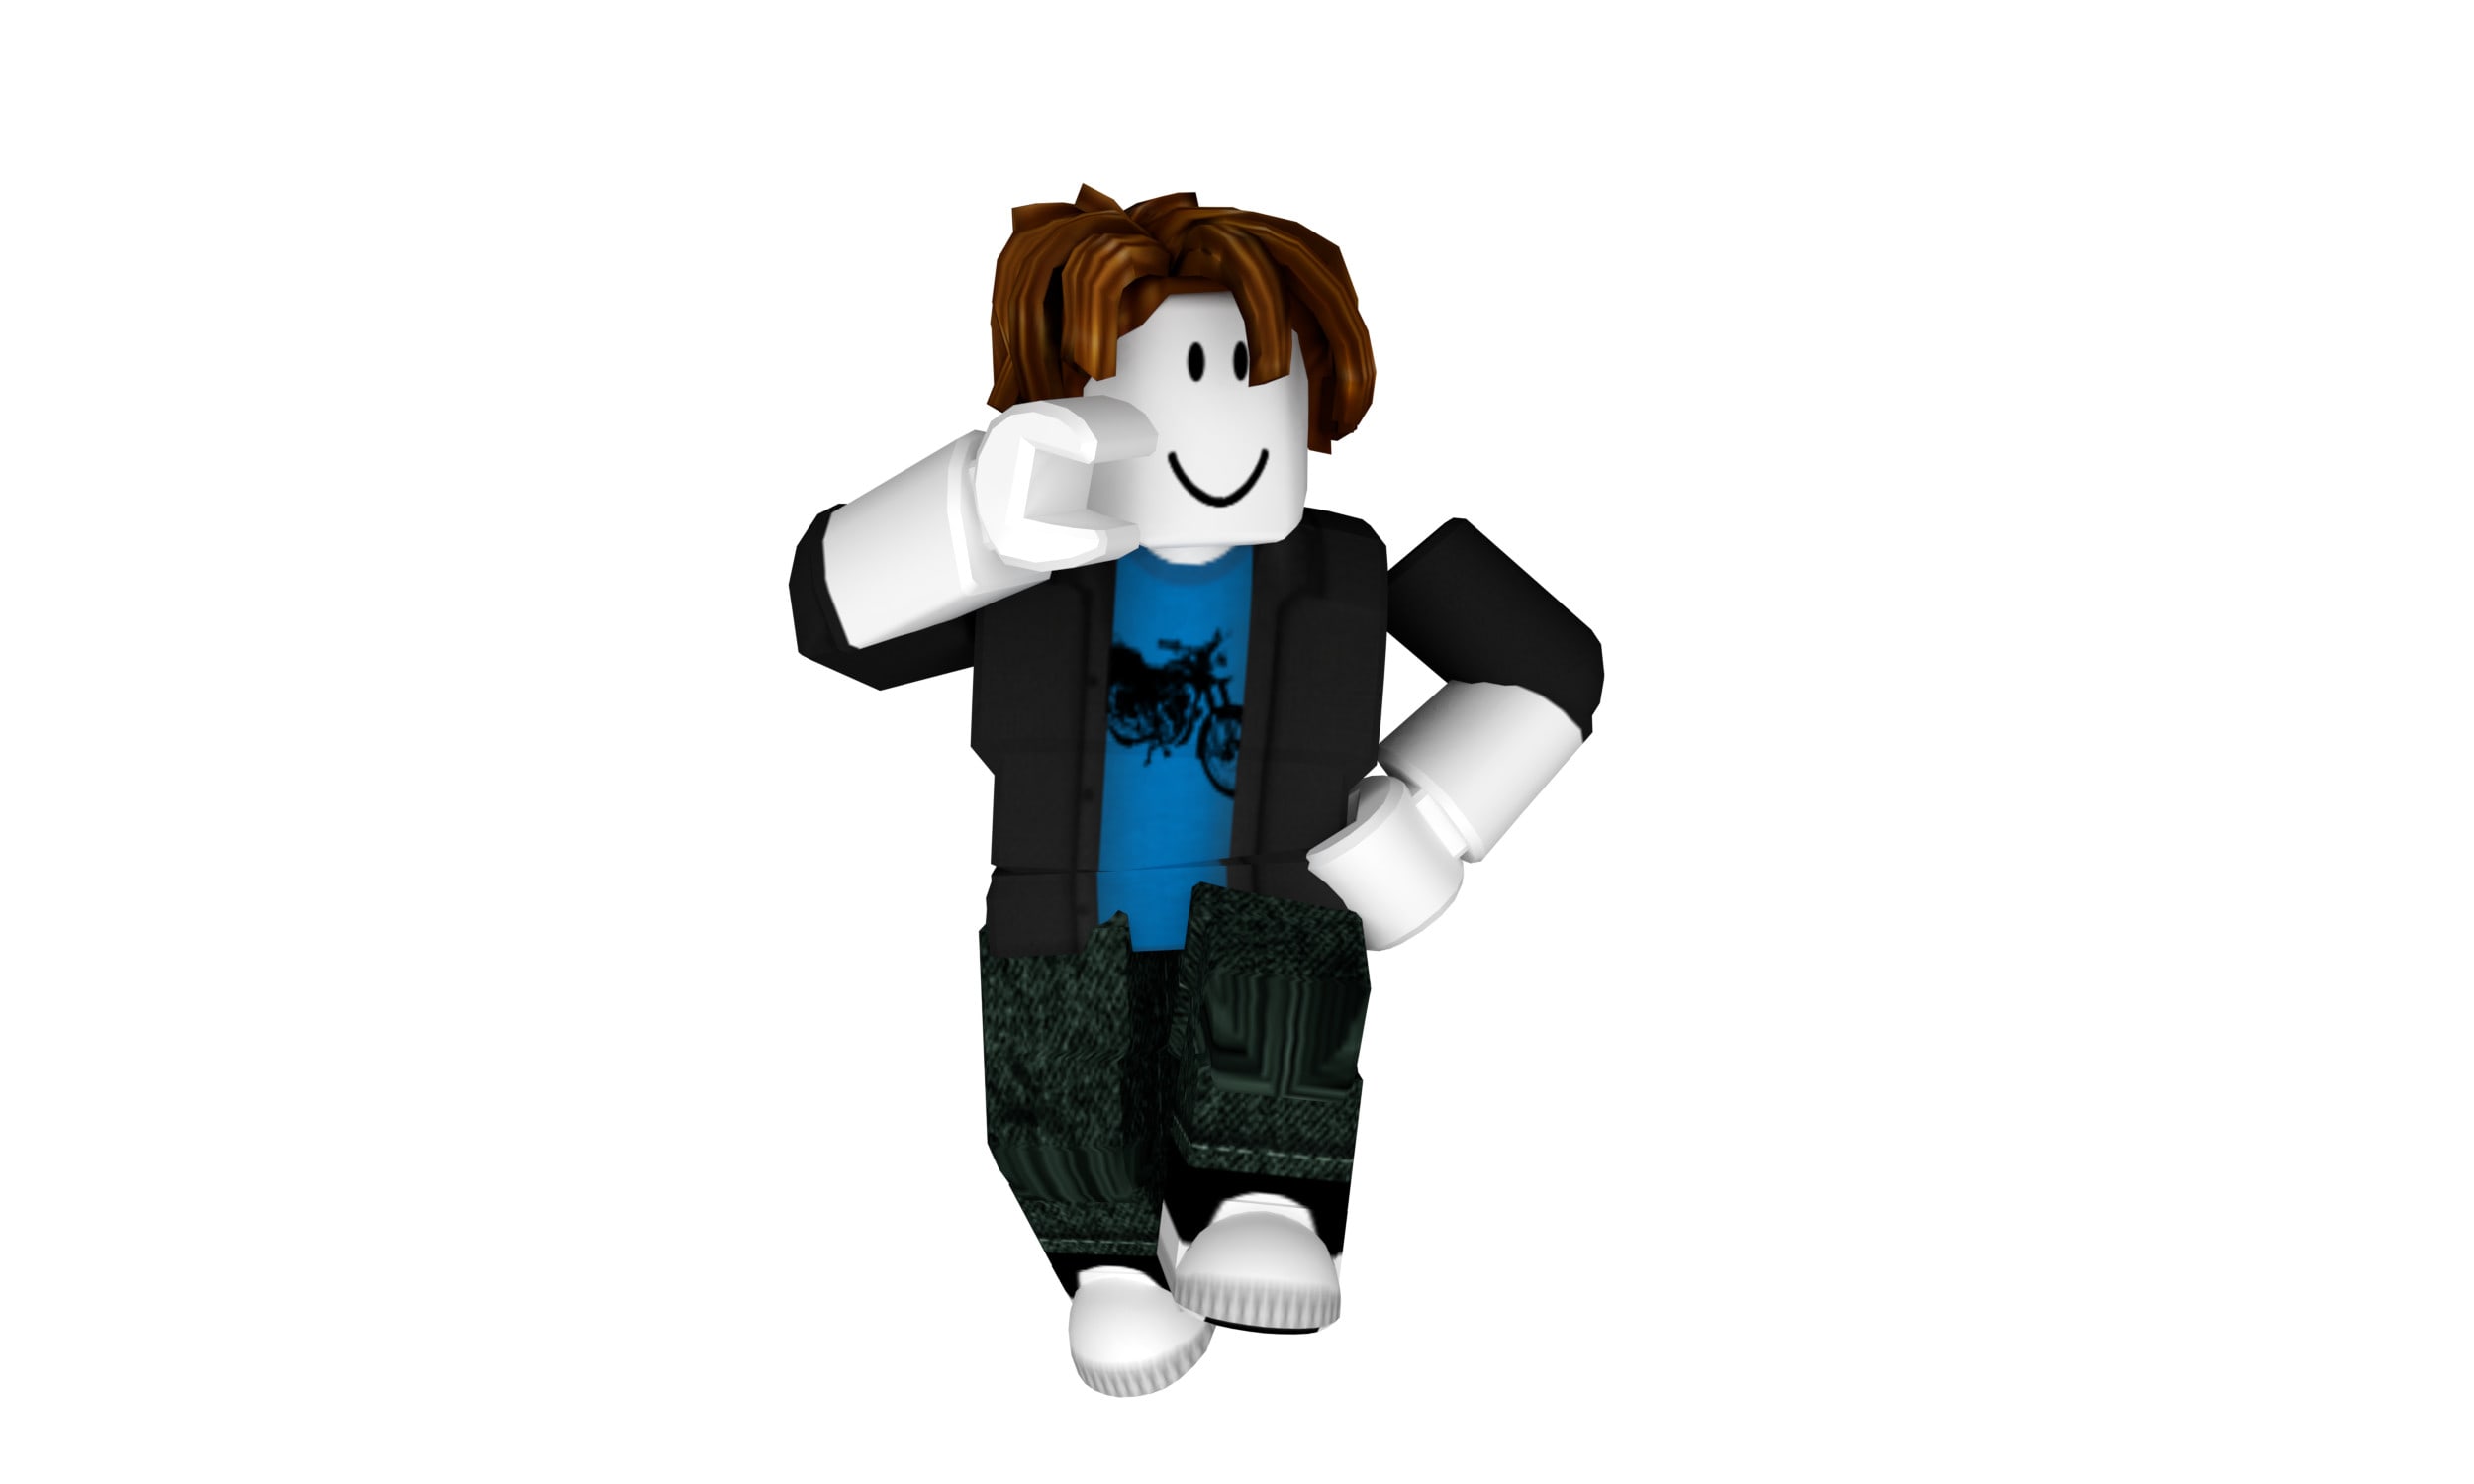 Roblox Images Of Characters